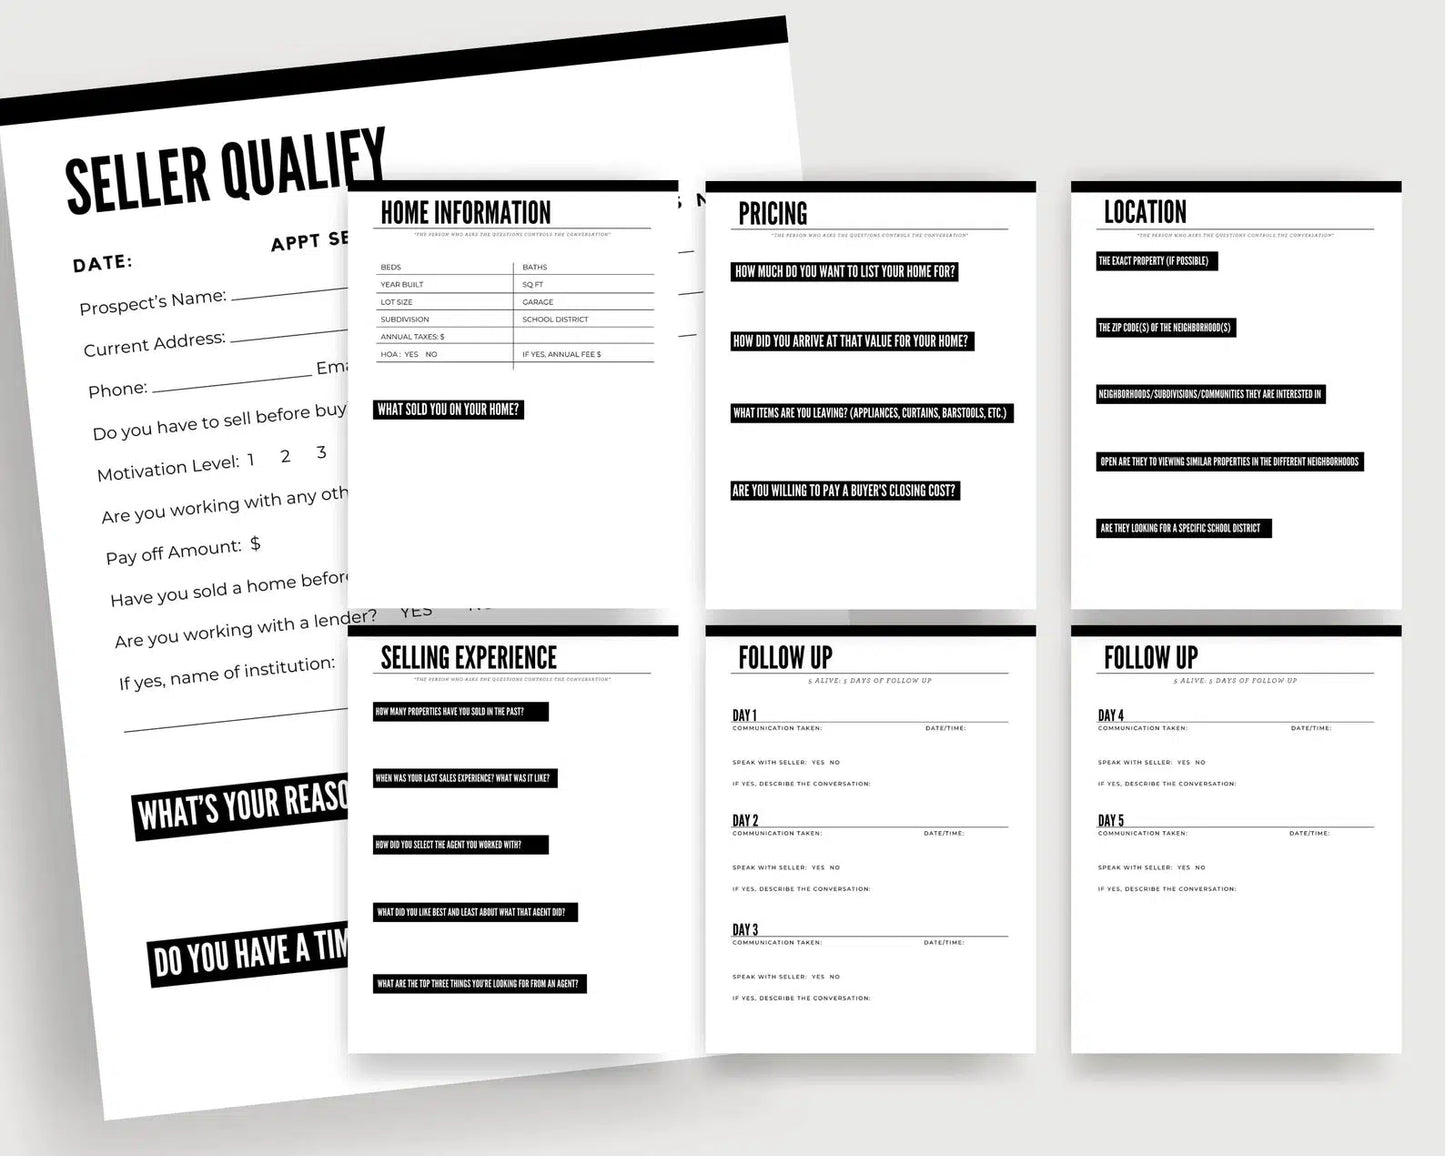 Real Estate Template for Buyer and Seller Questionnaire Real Estate Form Template for Sellers Real Estate Form Template for Buyers Real Estate Questionnaire Template Real Estate Follow-up Form Template